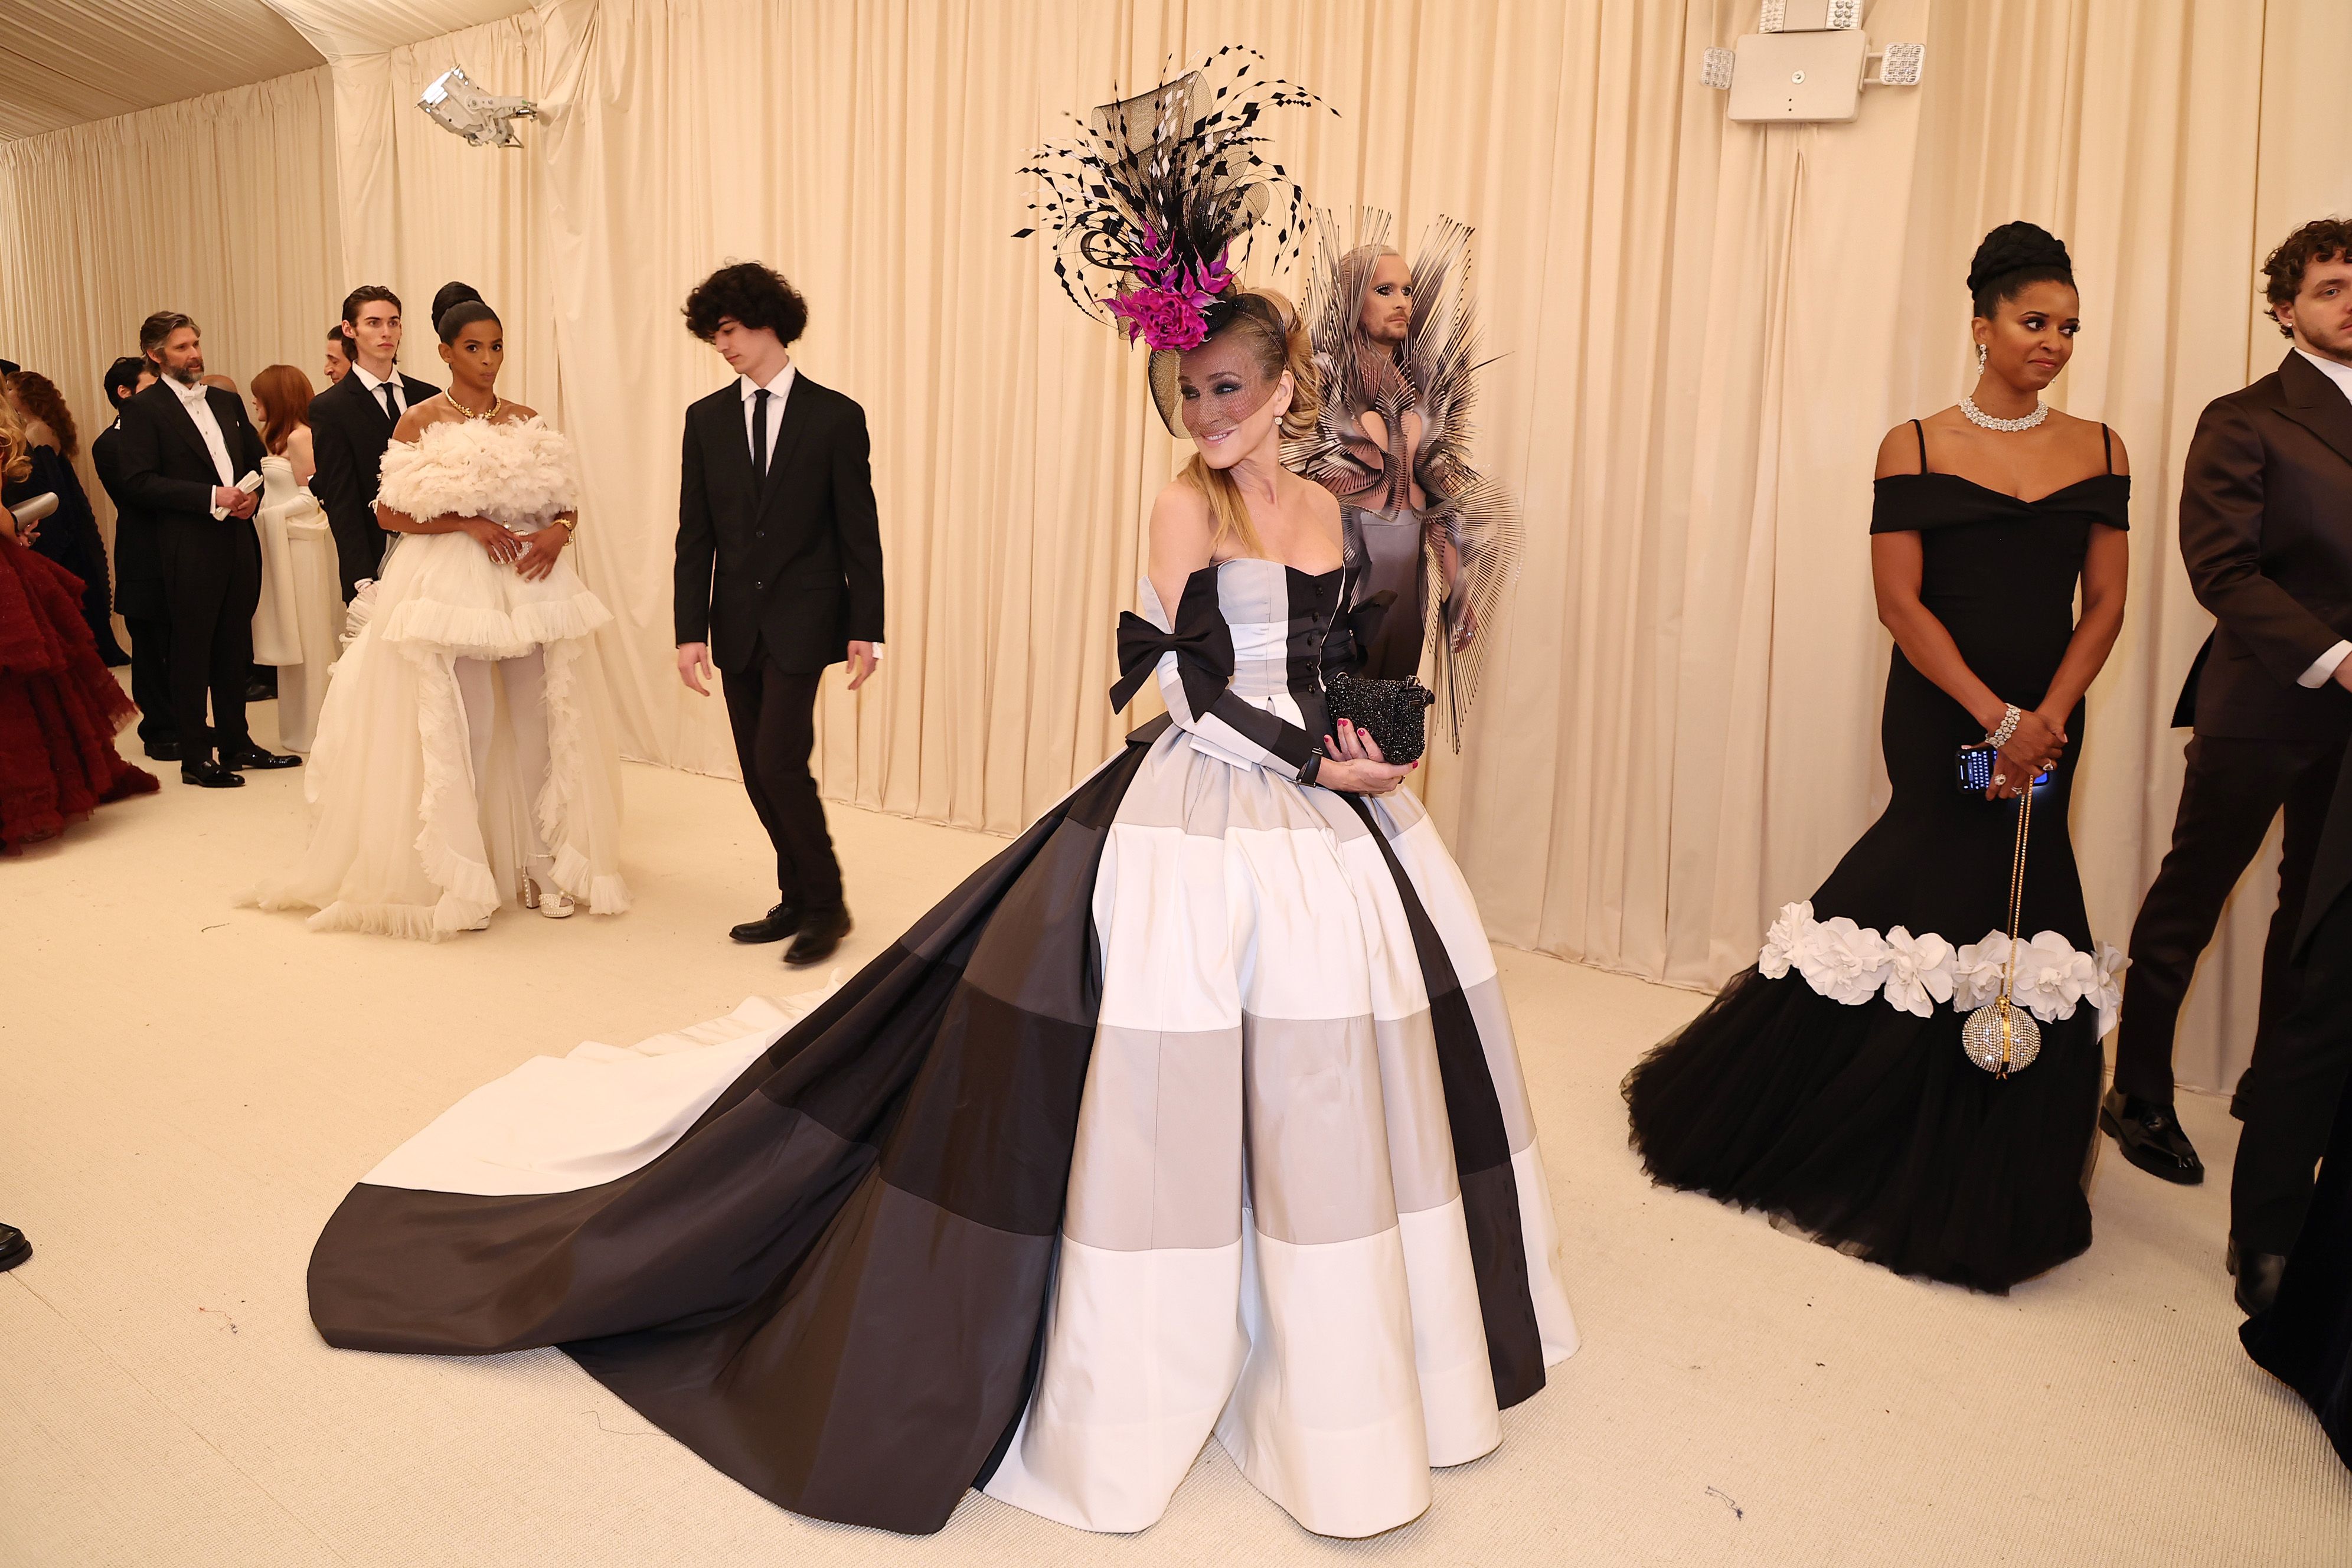 Met Gala 2022 Celeb Red Carpet Outfits: See Photos